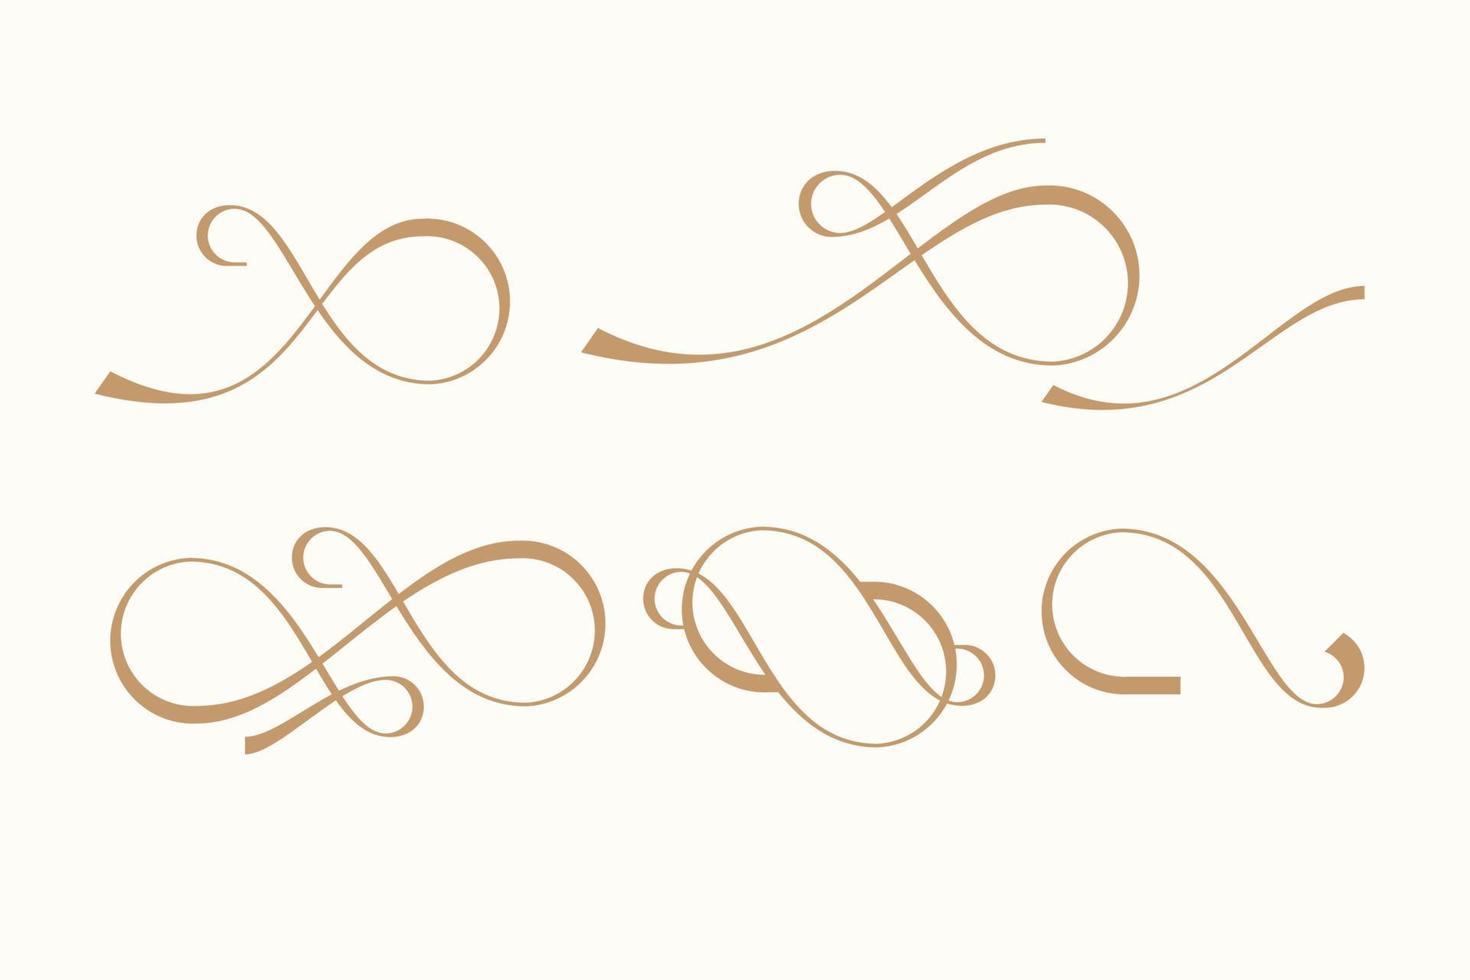 motifs straps ribbons supporting fonts or frames vector